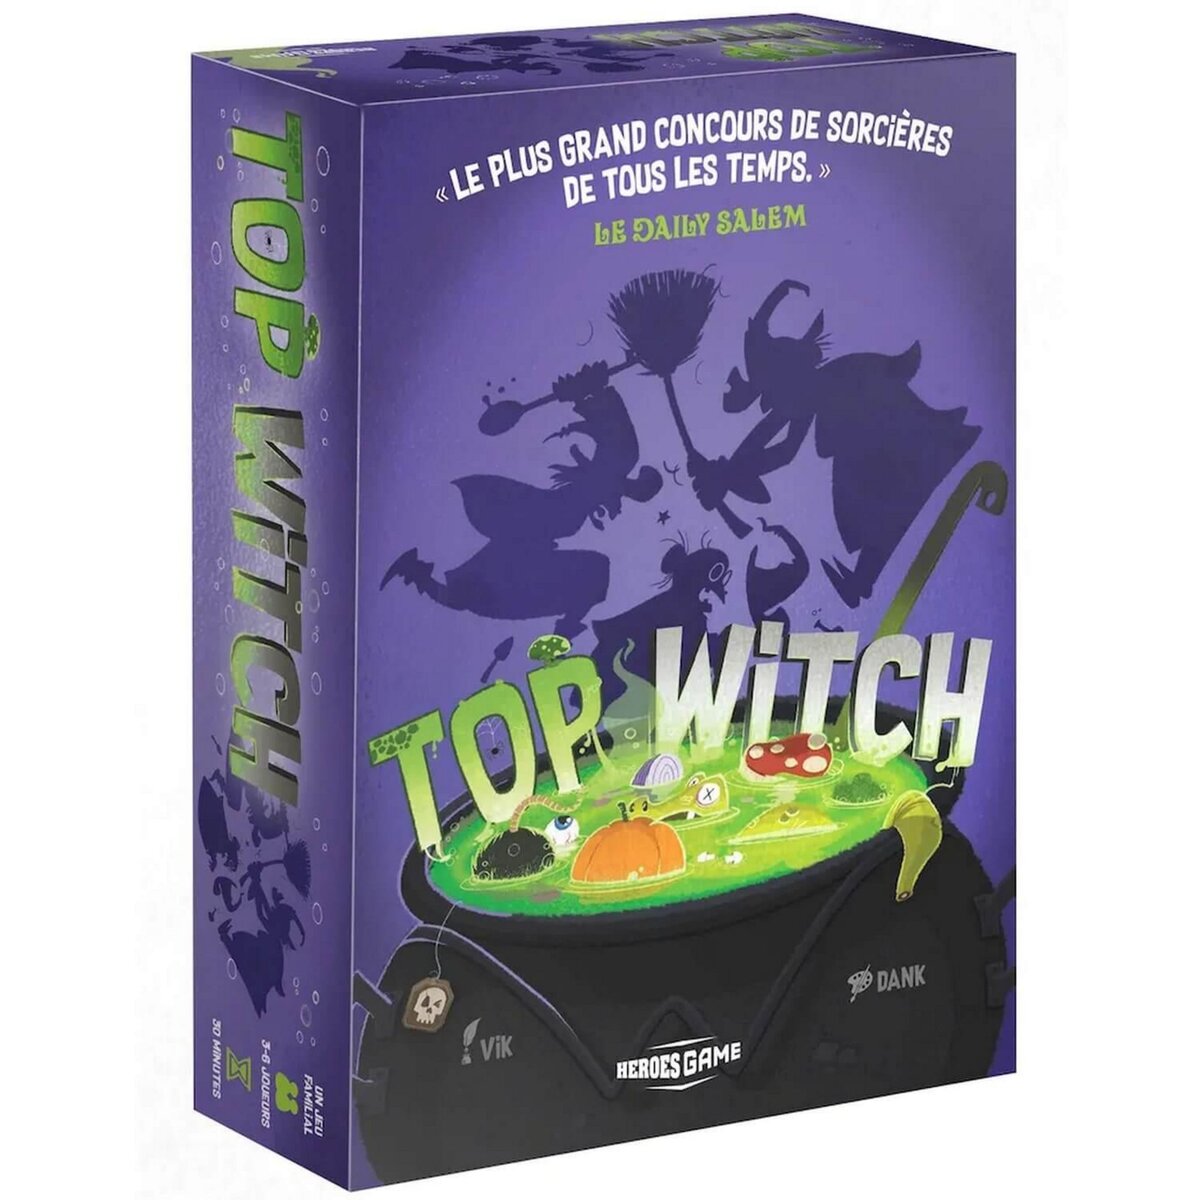  Top Witch